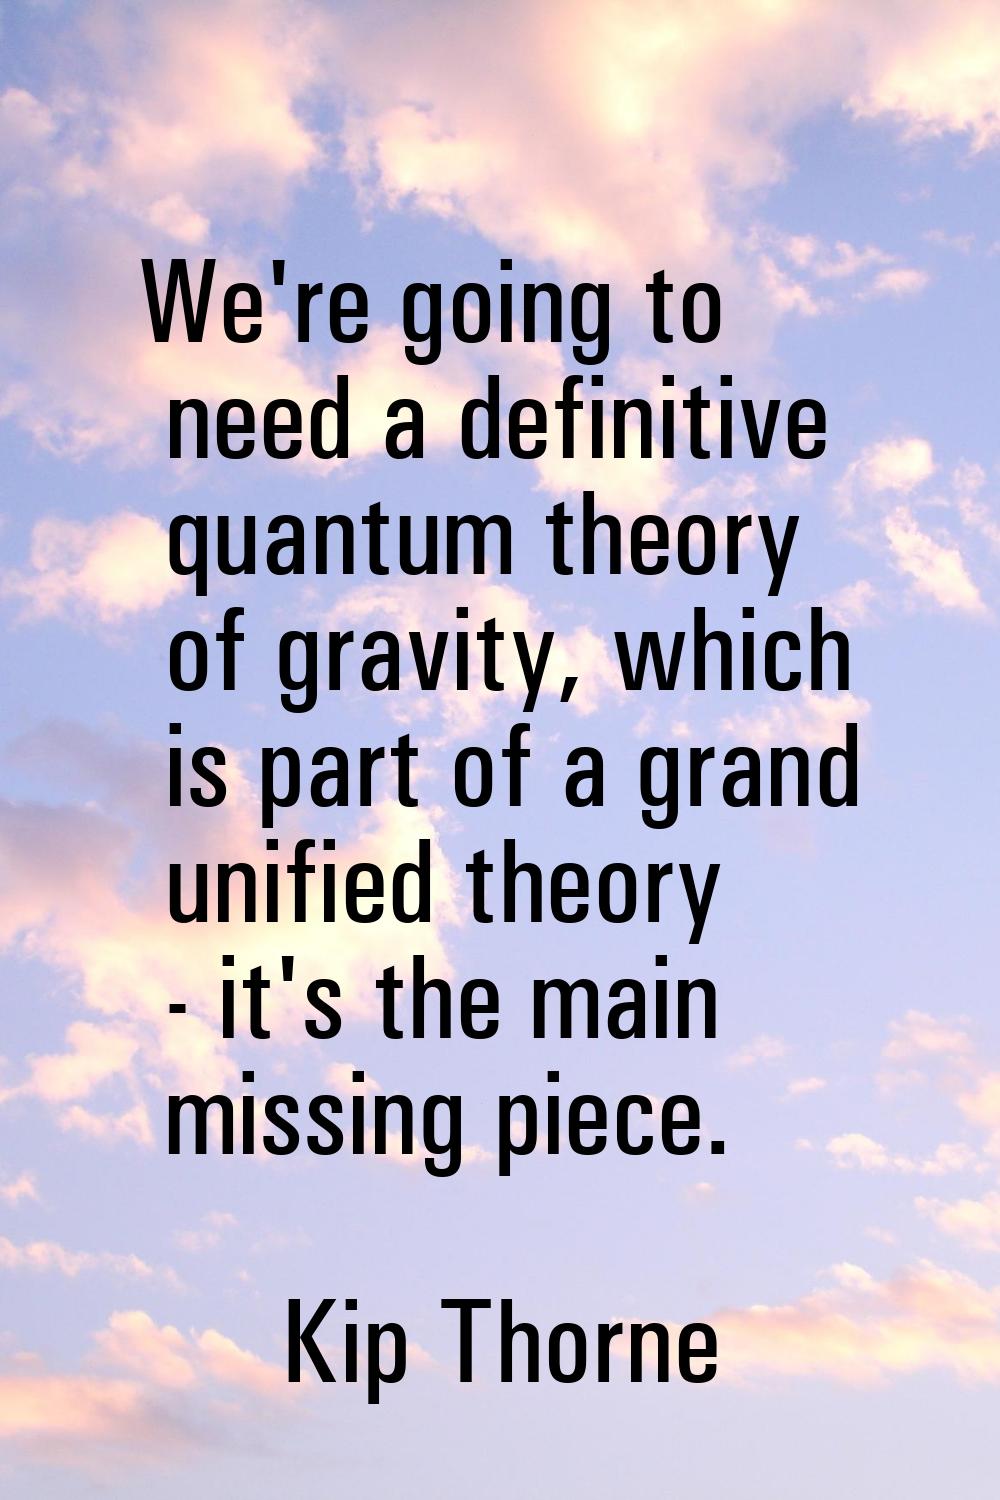 We're going to need a definitive quantum theory of gravity, which is part of a grand unified theory